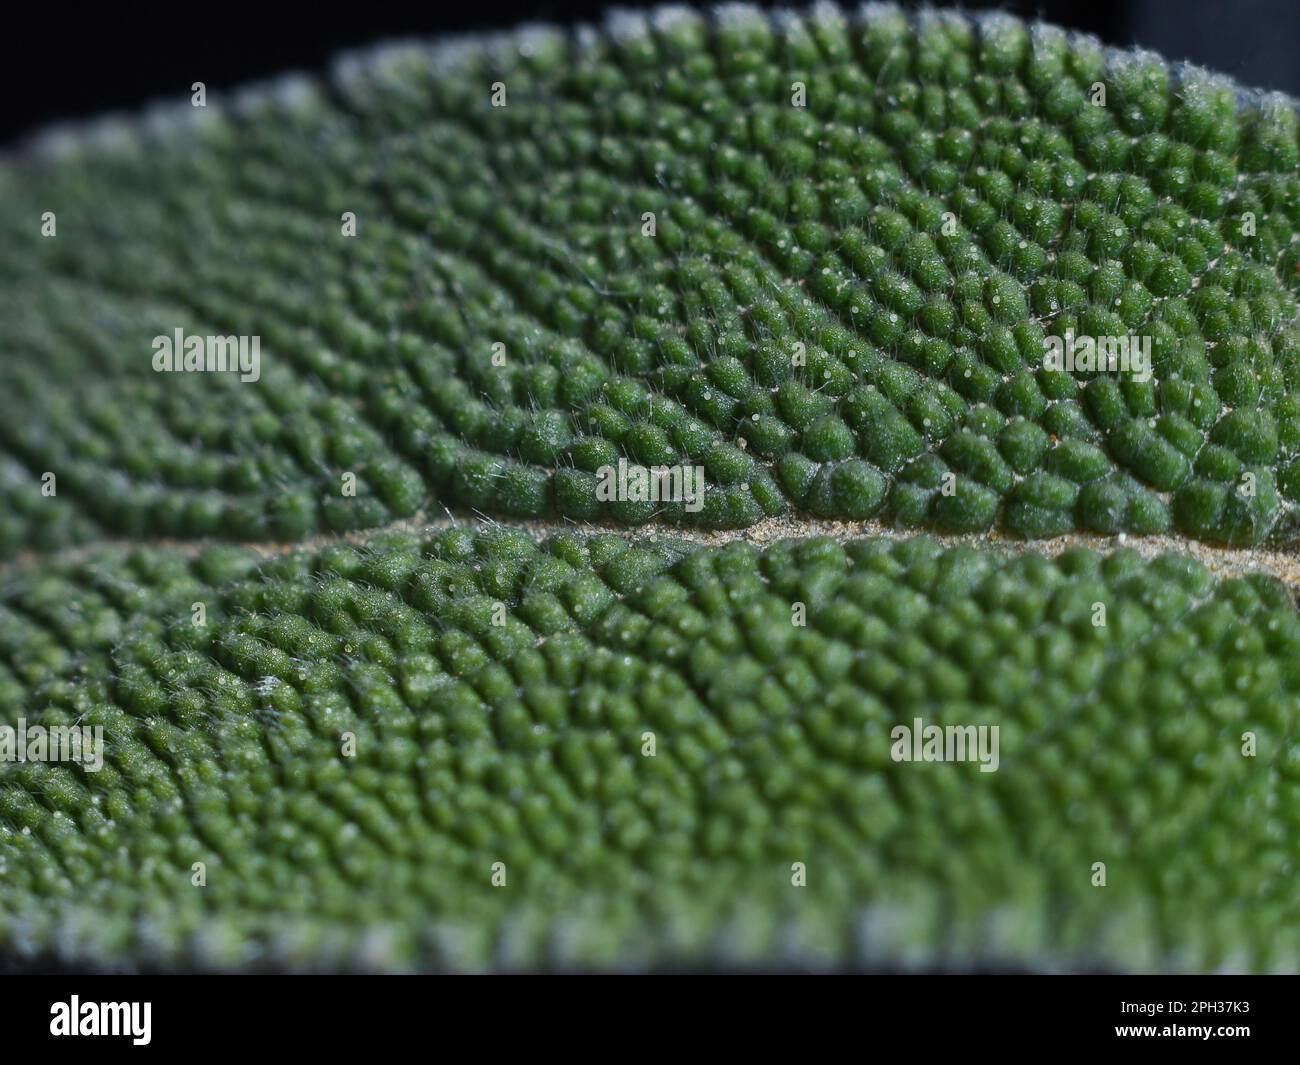 sage leaf macro magnified image showing microstructure of the leaf Stock Photo